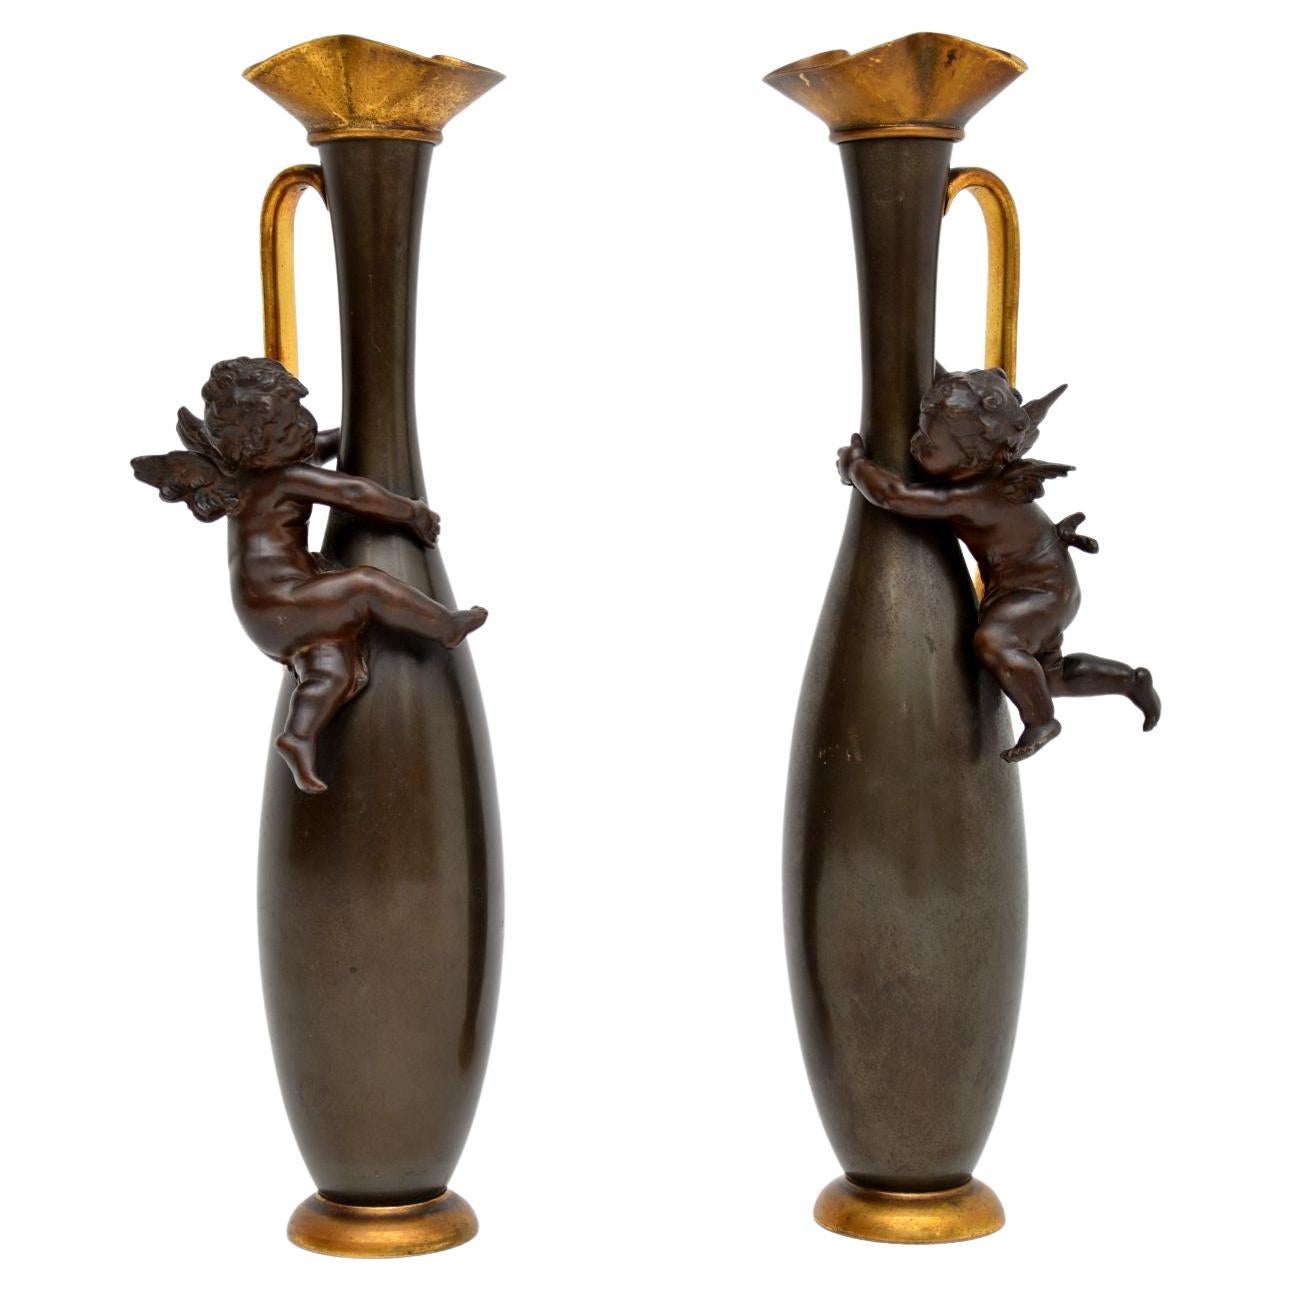 Pair of Antique French Decorative Bronze Pitchers